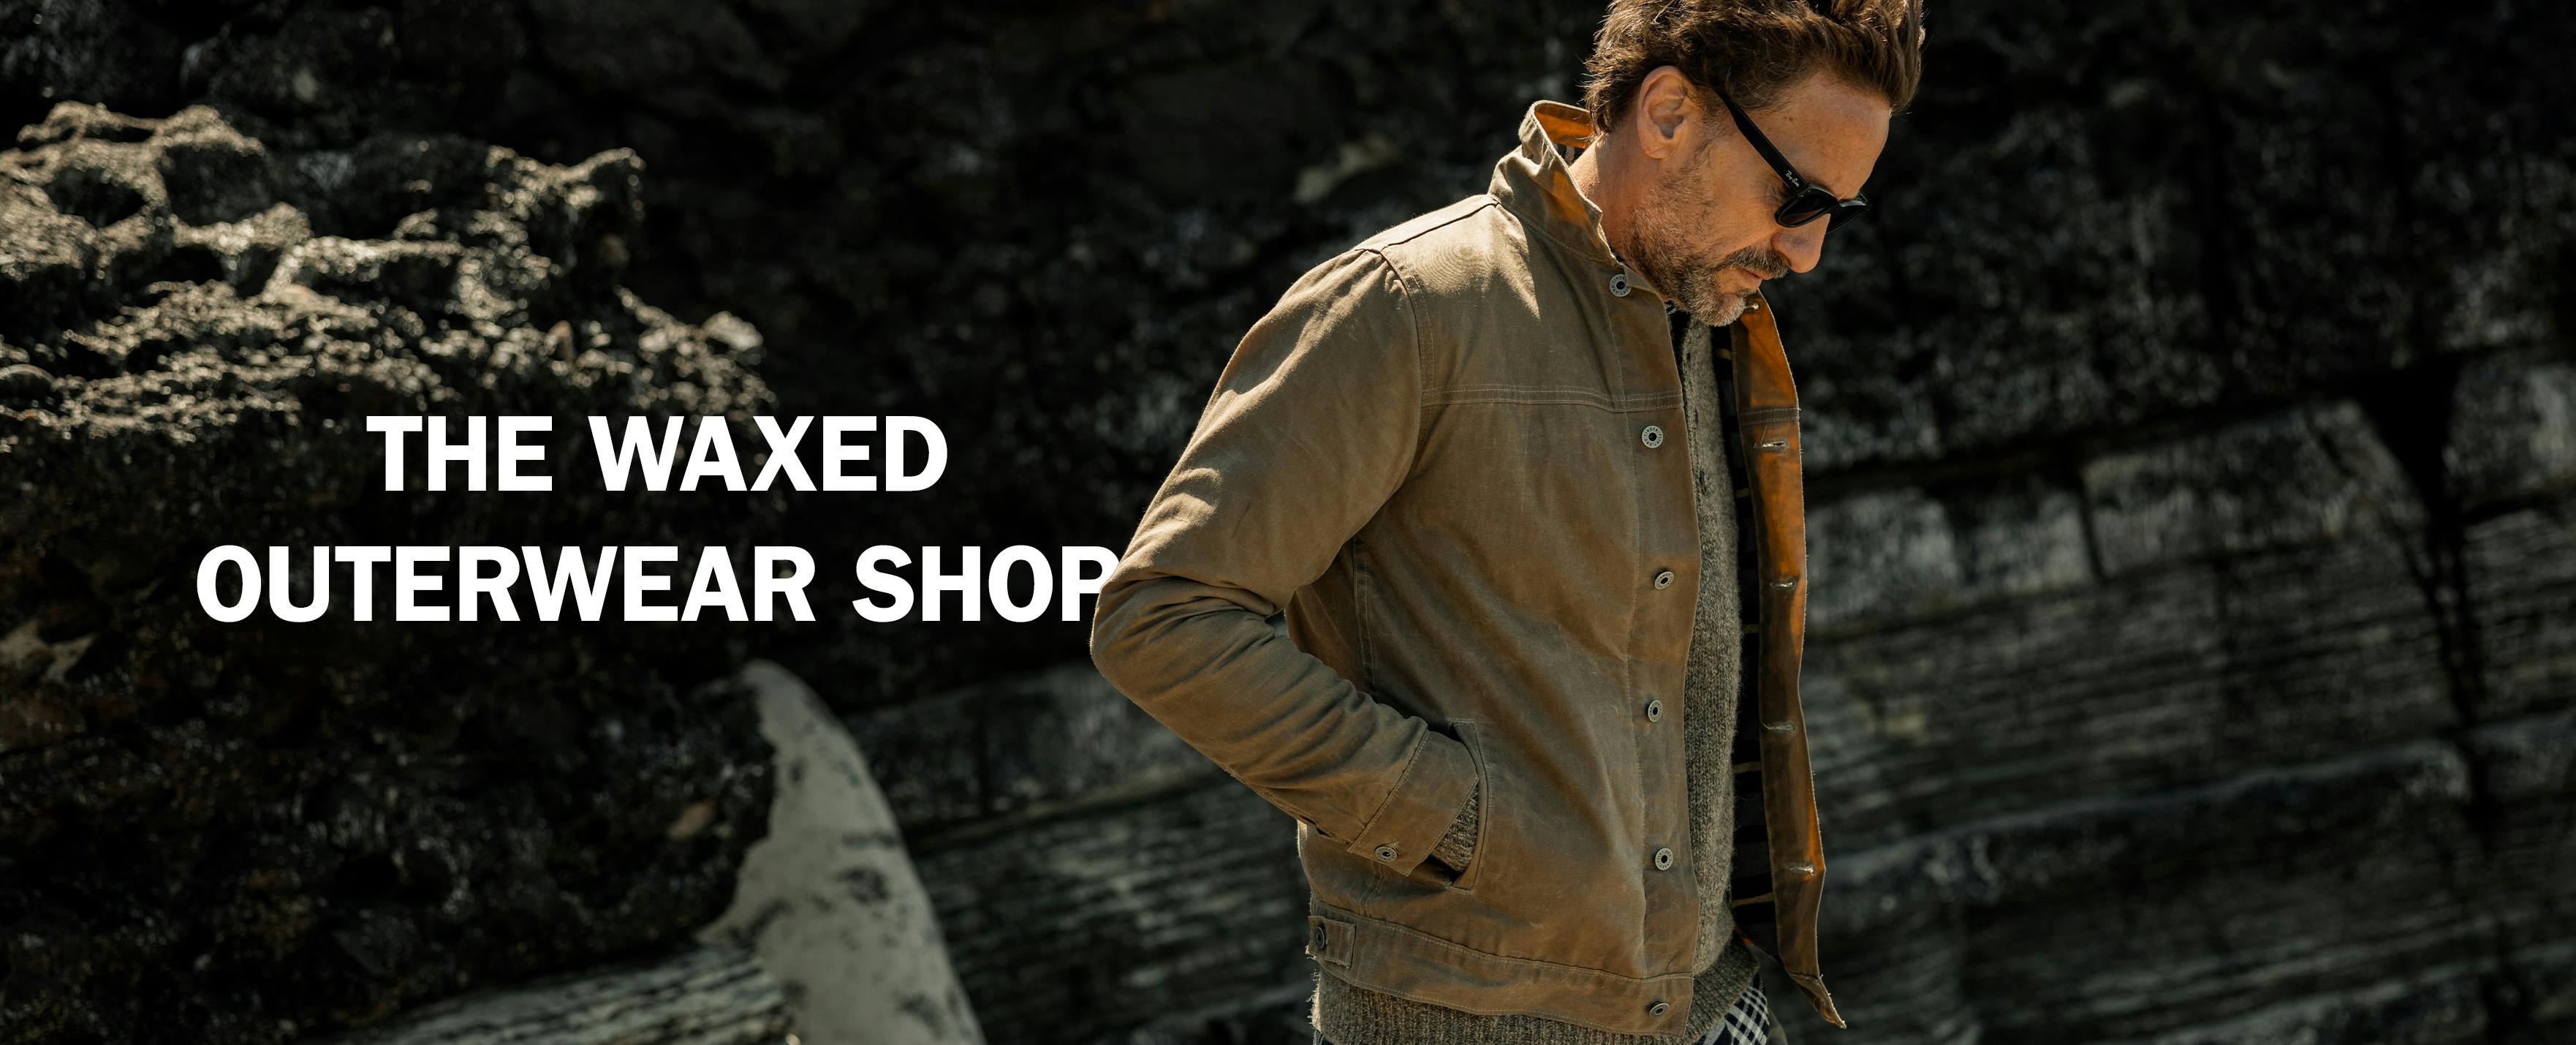 The Waxed Outerwear Shop